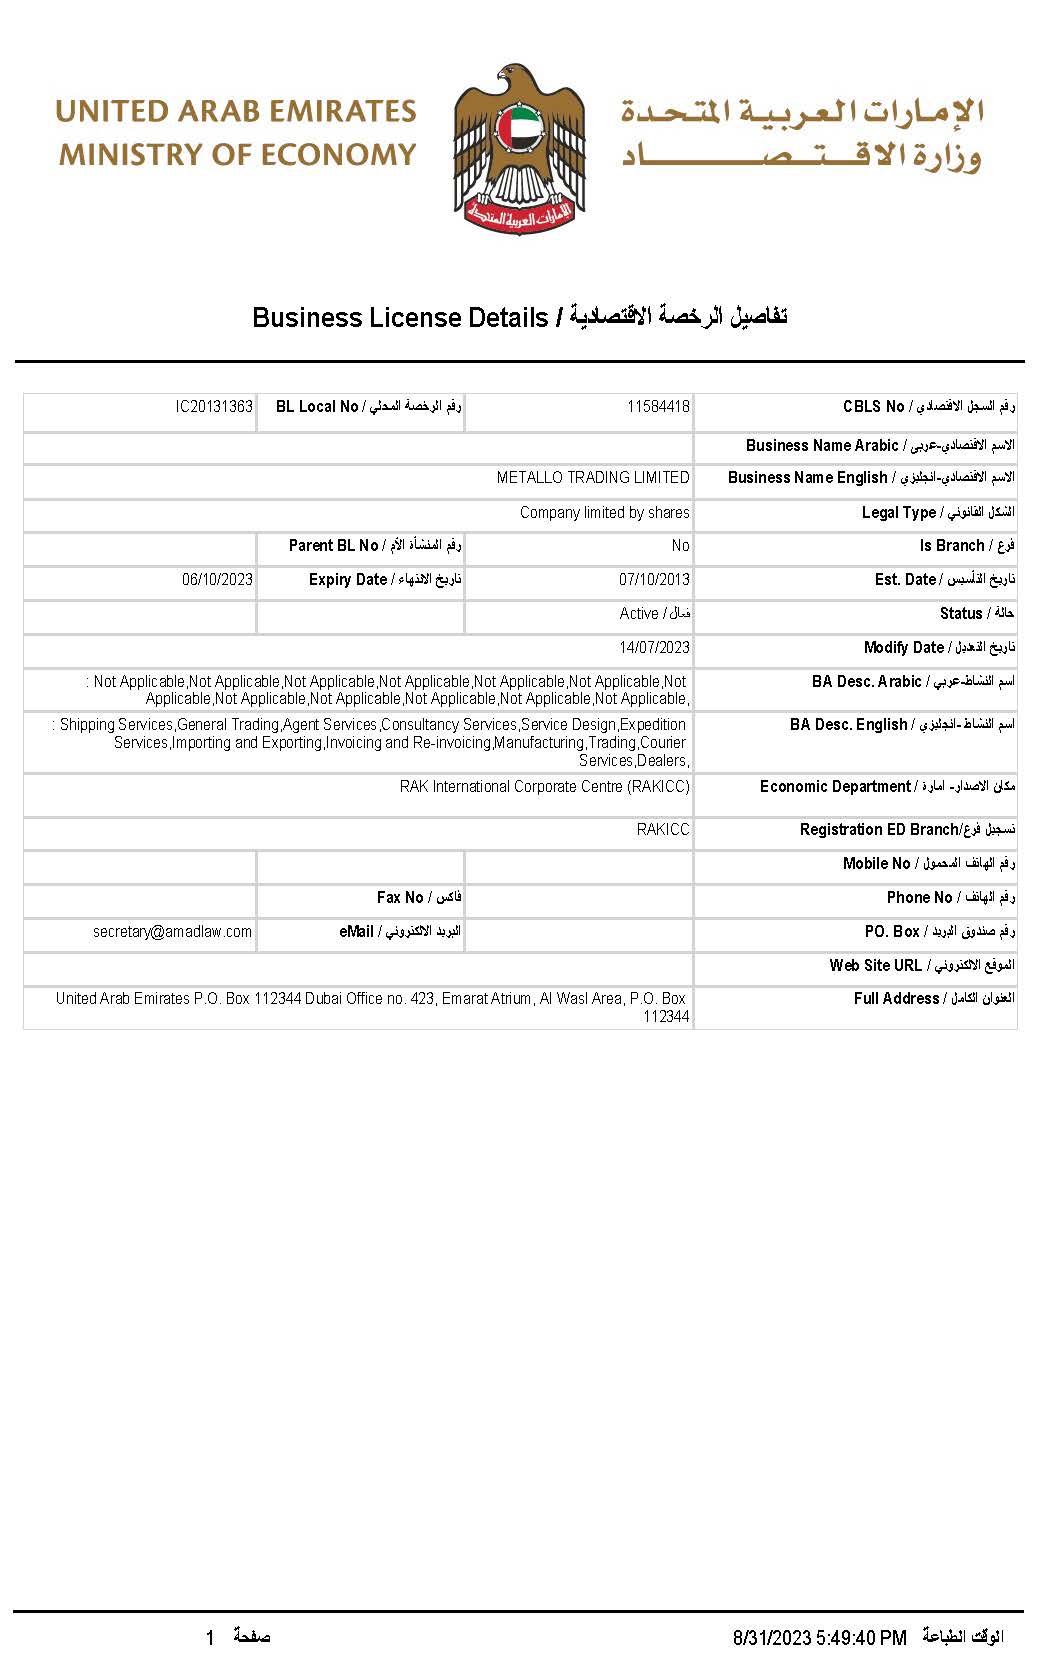 Extract from commercial register of United Arab Emirates